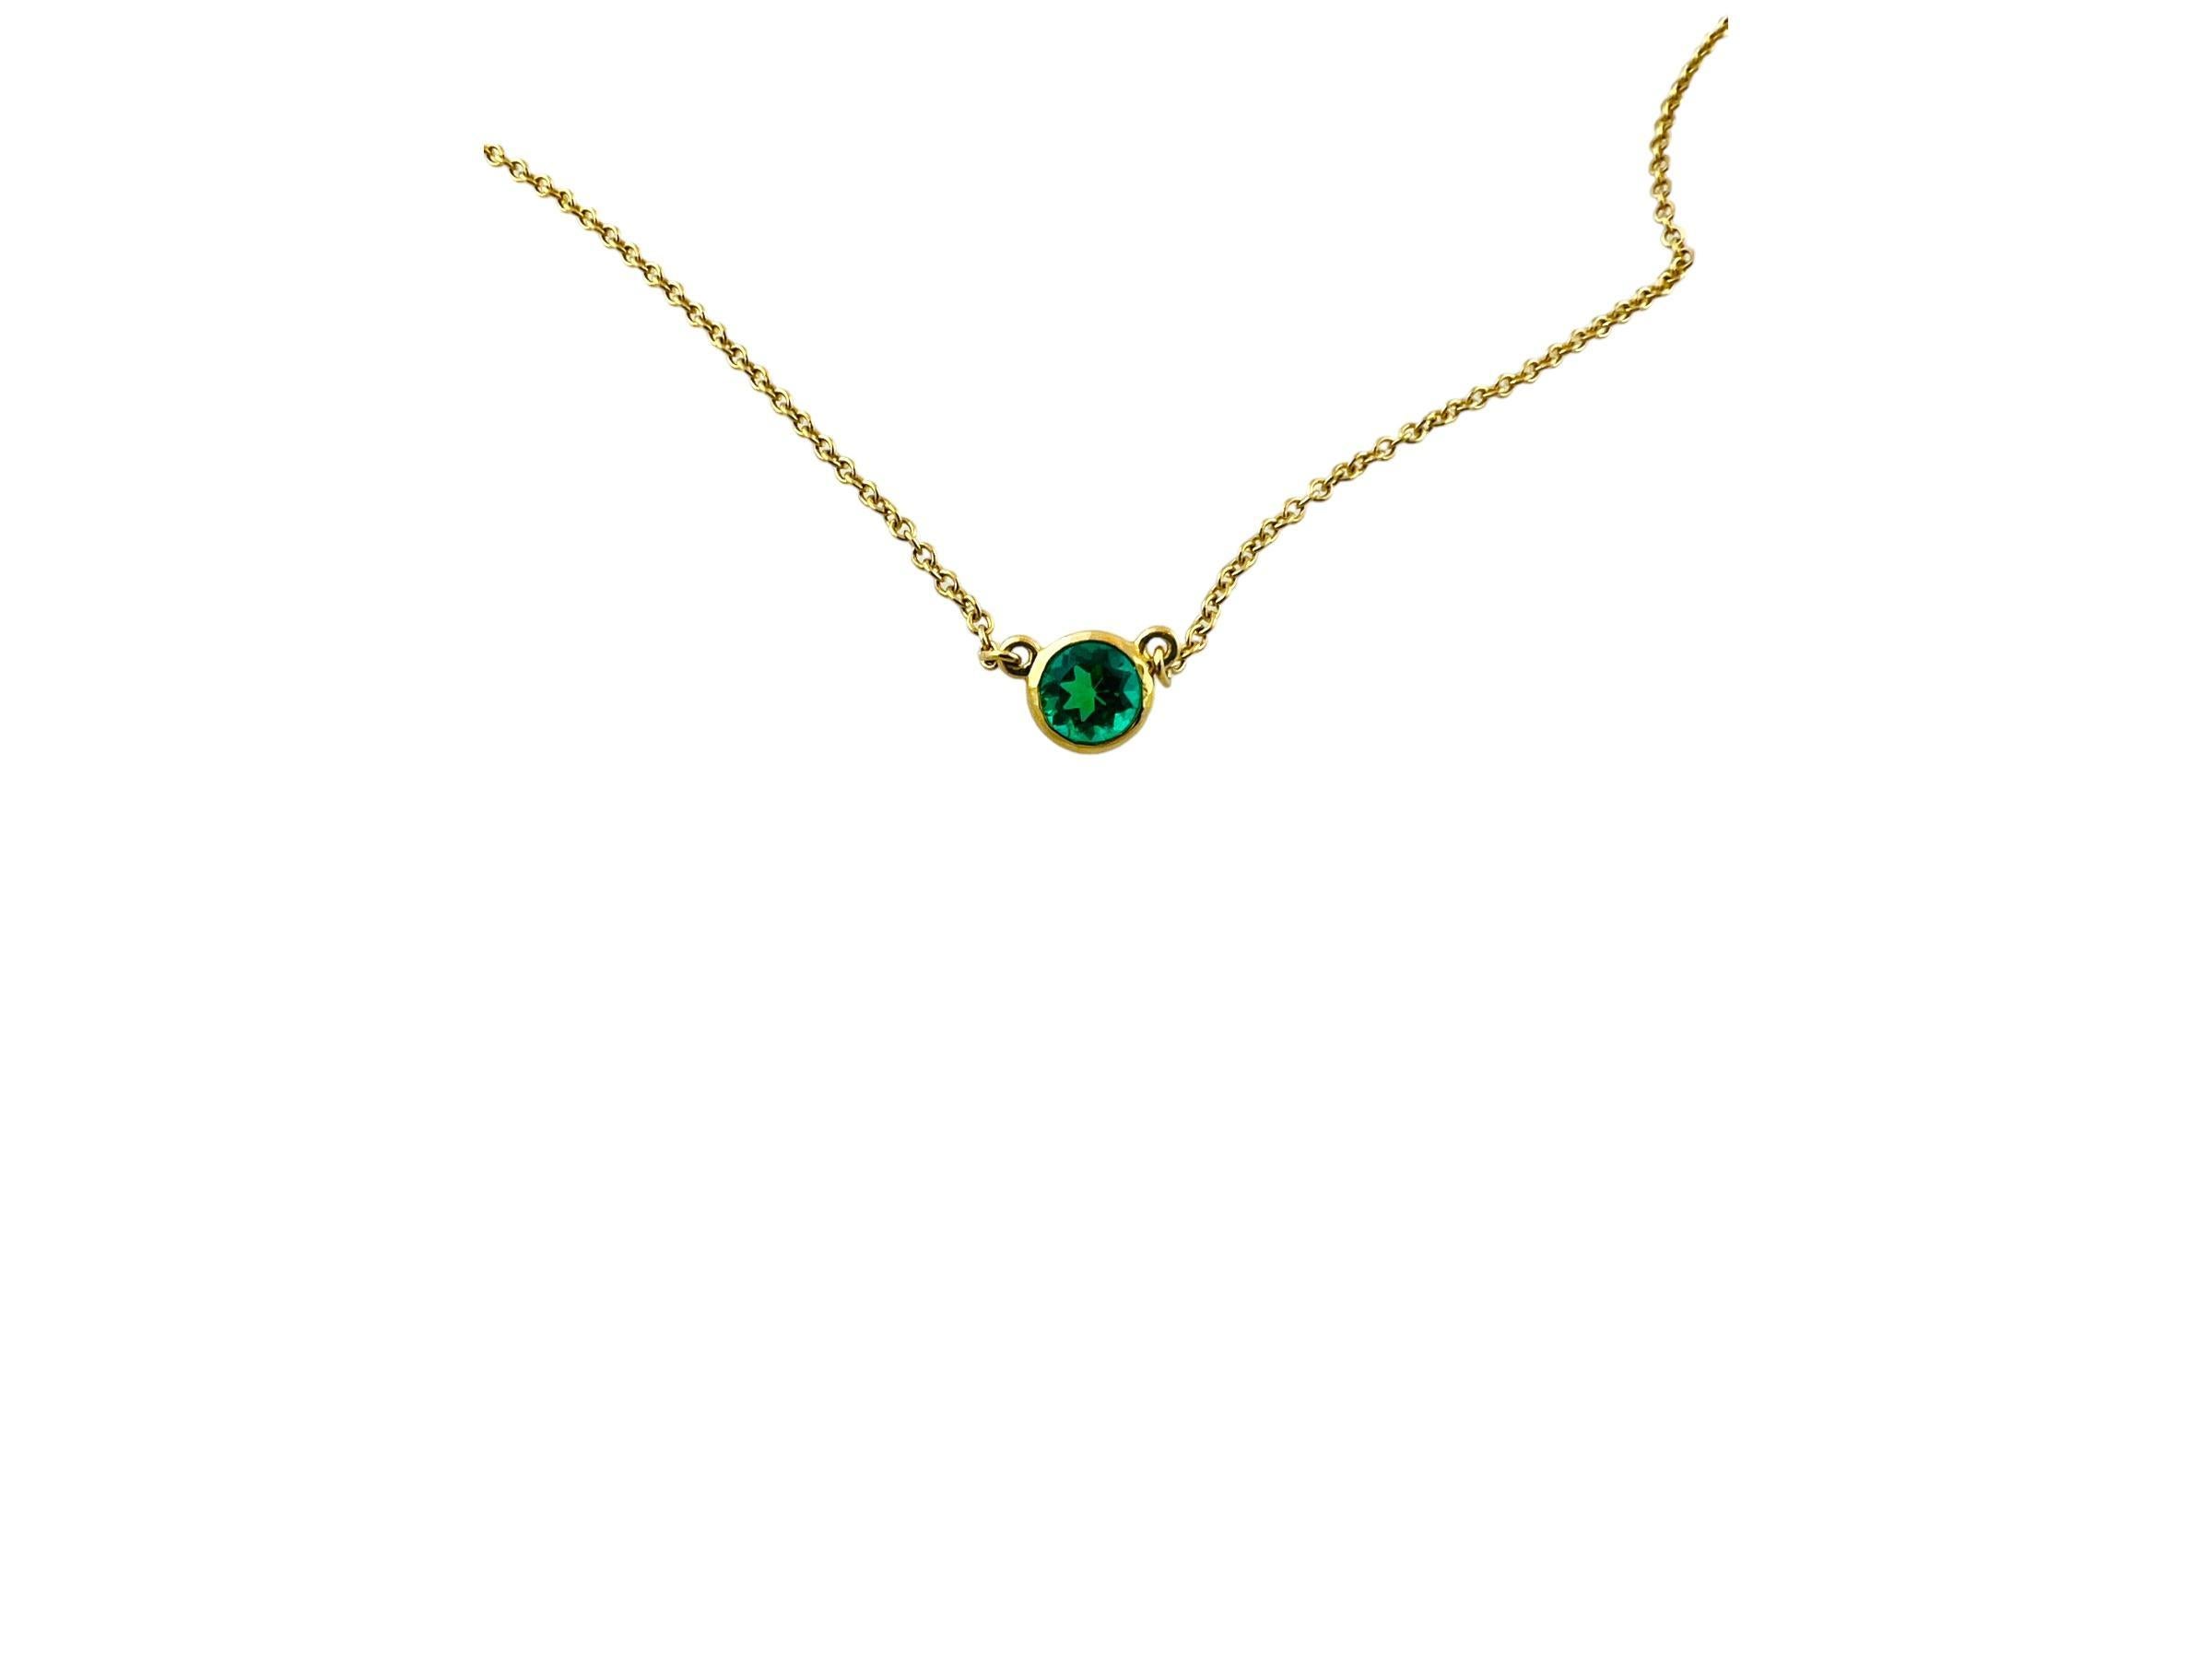 Round Cut Tiffany & Co. Elsa Peretti 18K Yellow Gold Emerald Color by Yard Necklace #15431